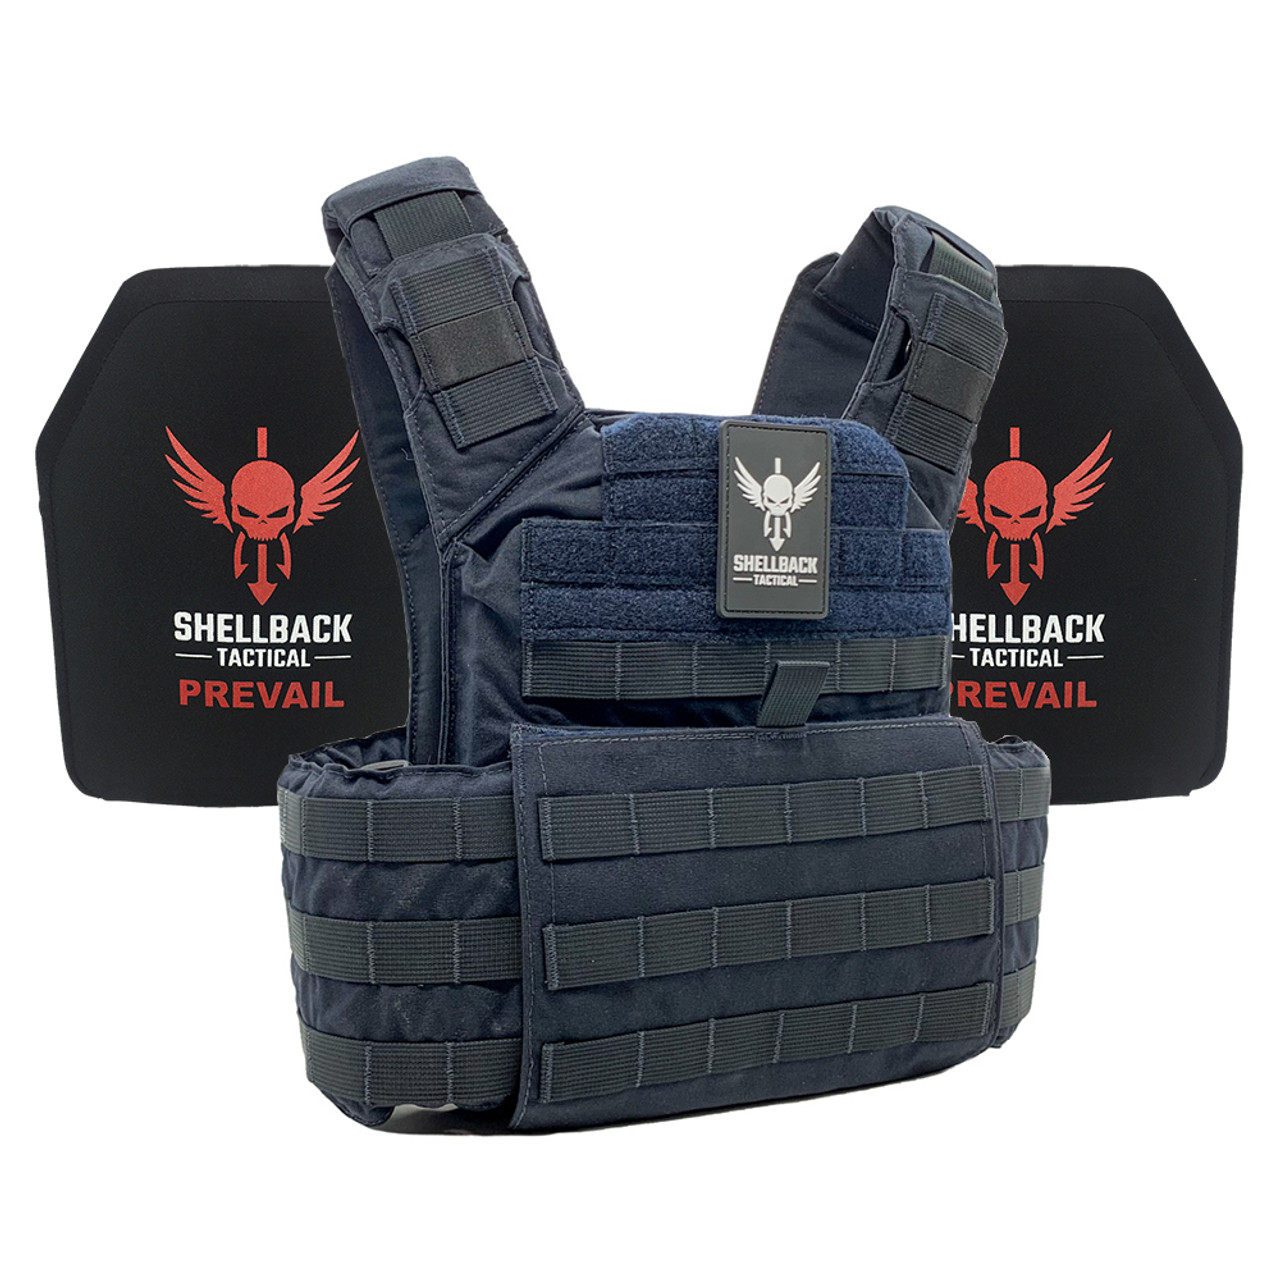 External Body armor protection level III-A + 2 HDPE (lightweight) plates L-  III (3) and option for detachable add-ons